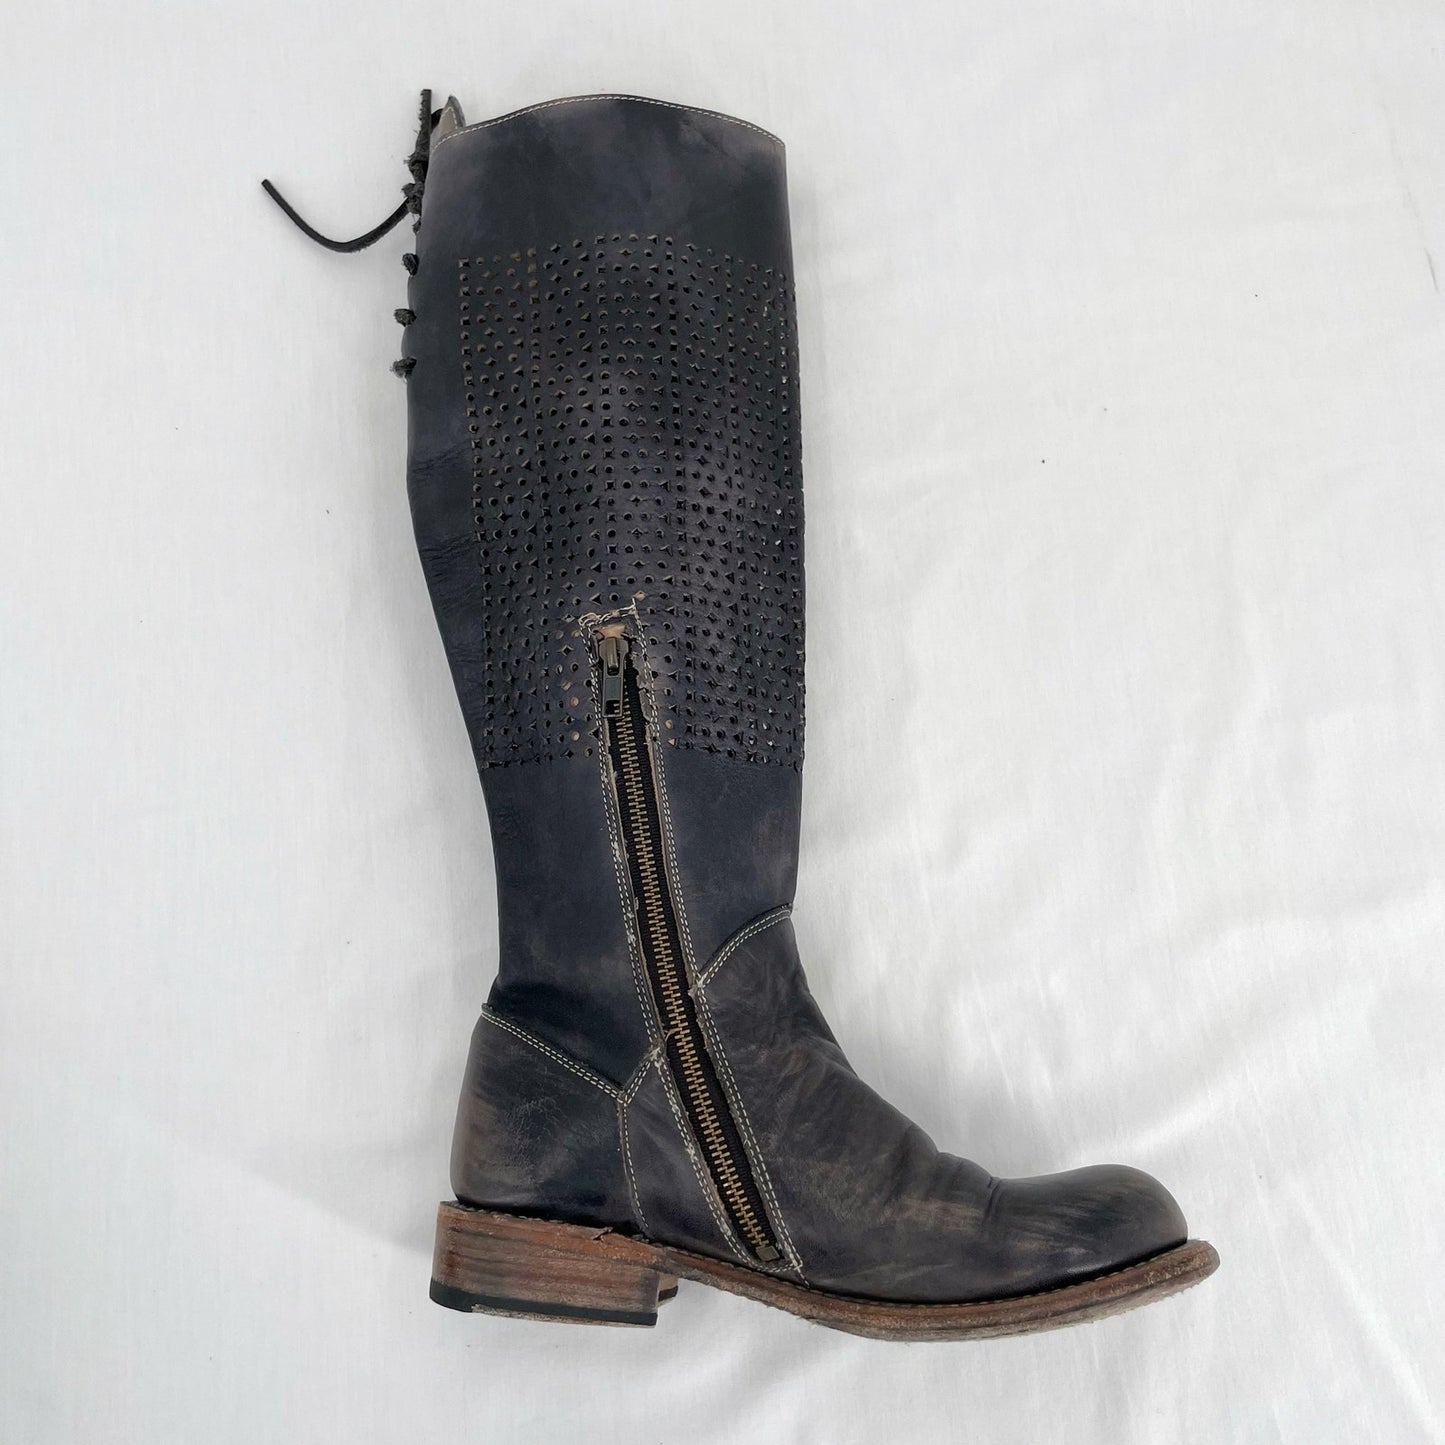 Bed|Stu Cambridge Boots Black Gray Cutout Perforated Tall Boho Shoes Size 7.5